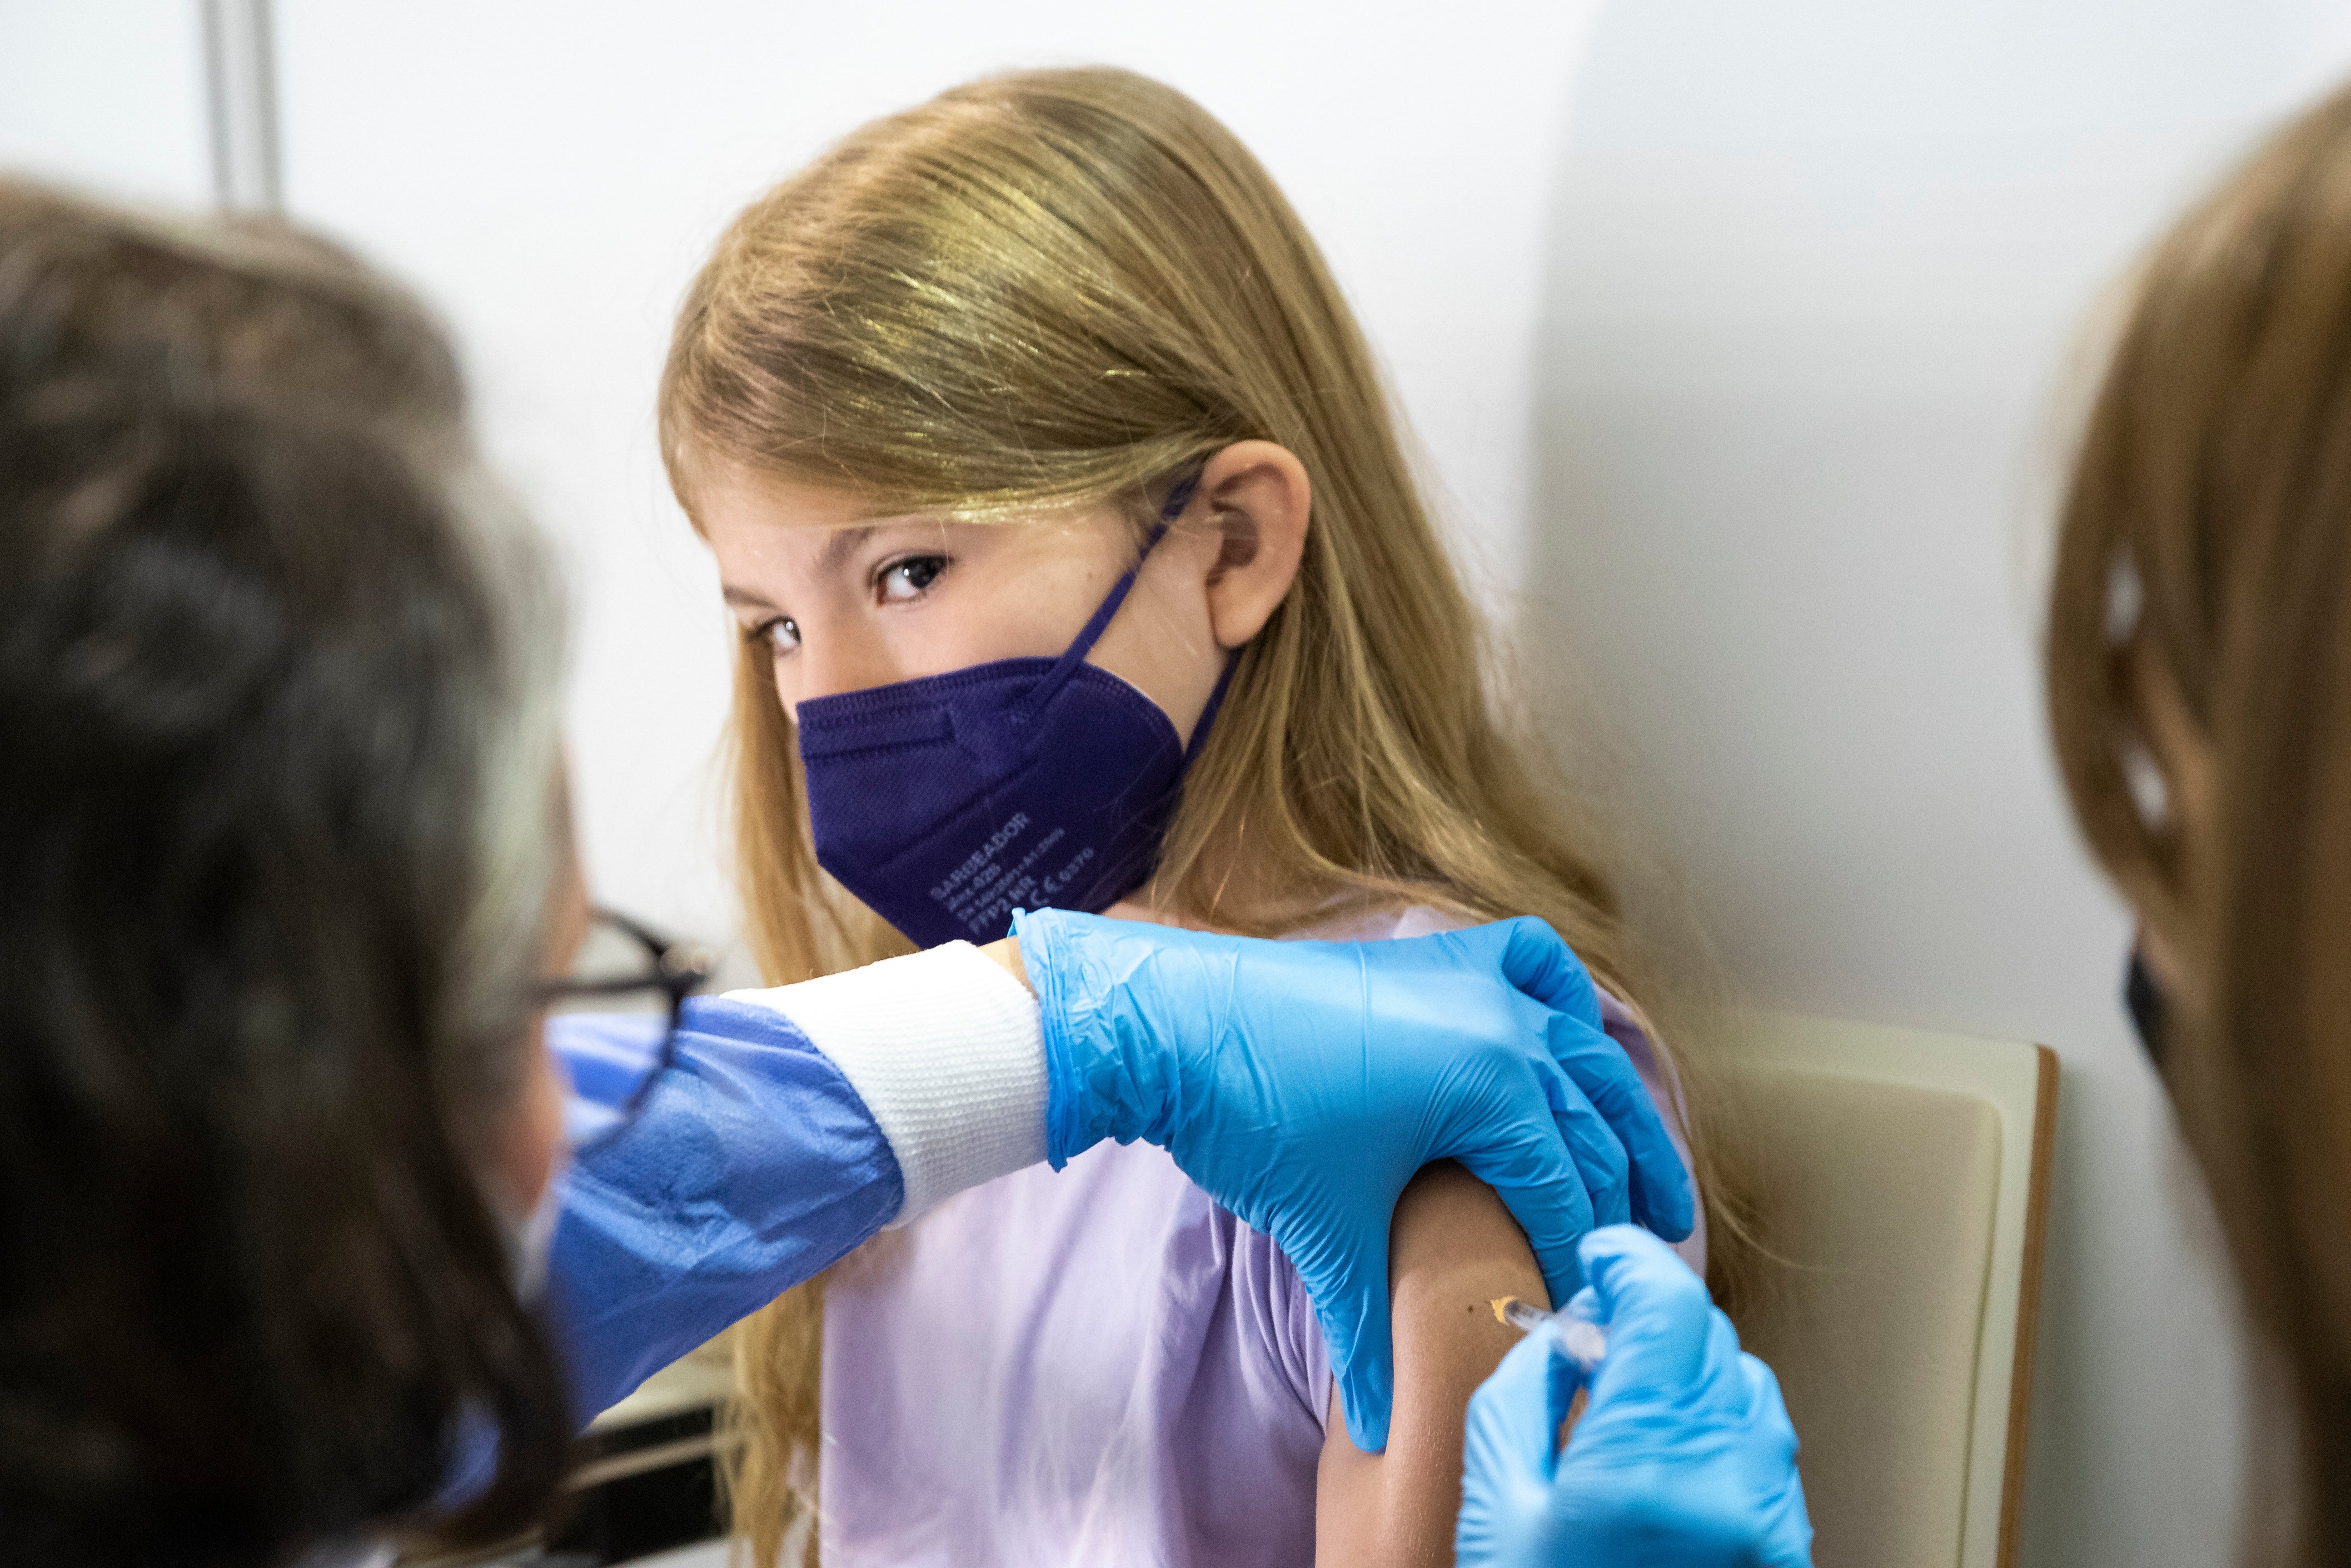 A young patient receives the Pfizer vaccine against Covid-19 in Vienna, Austria